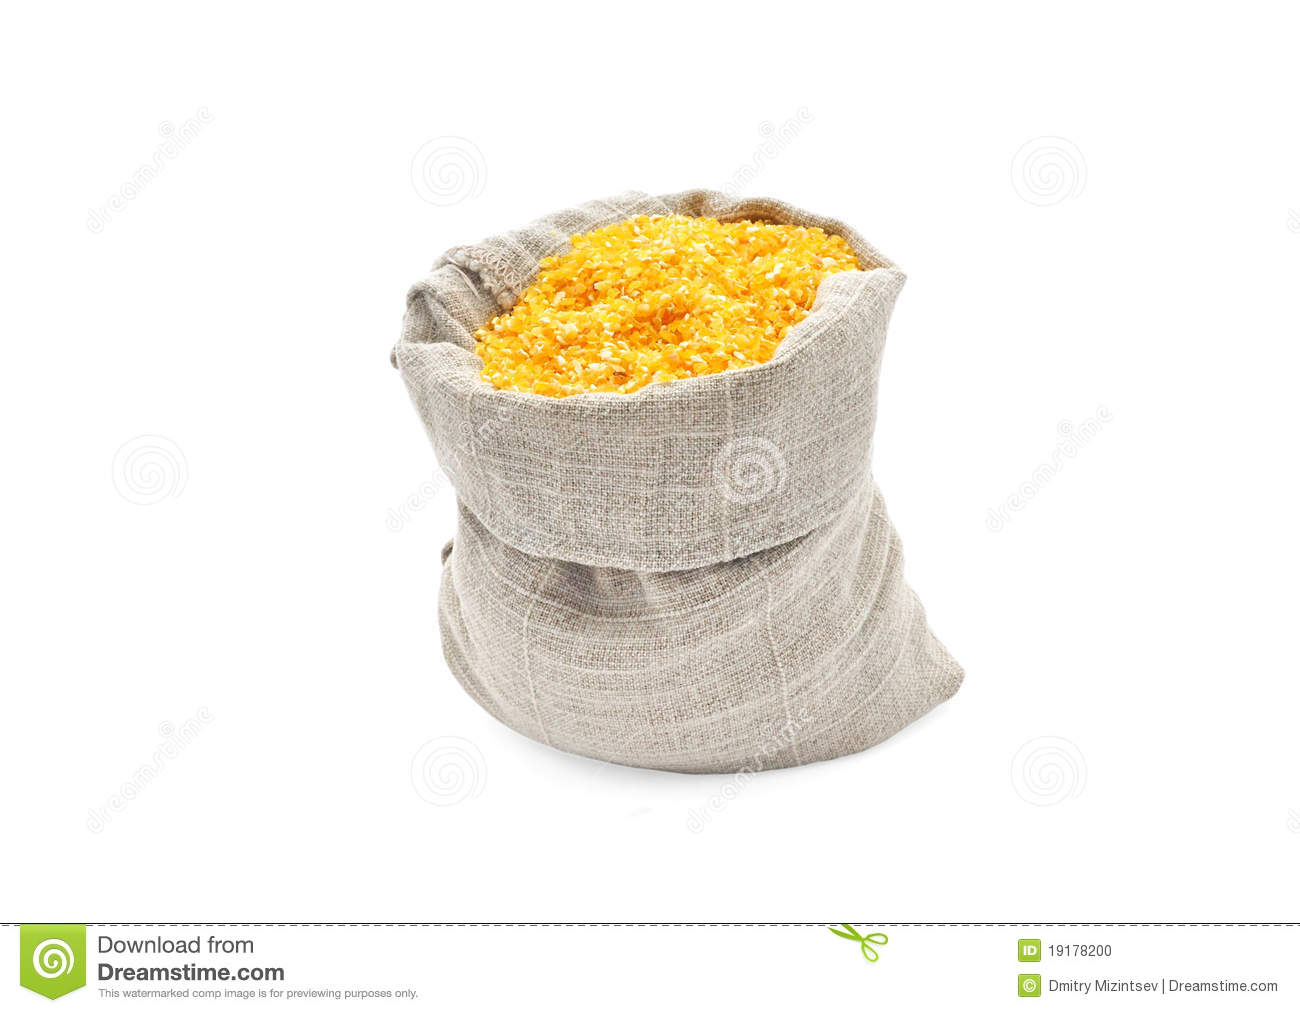 Corn Grits In A Bag  Stock Photo   Image  19178200